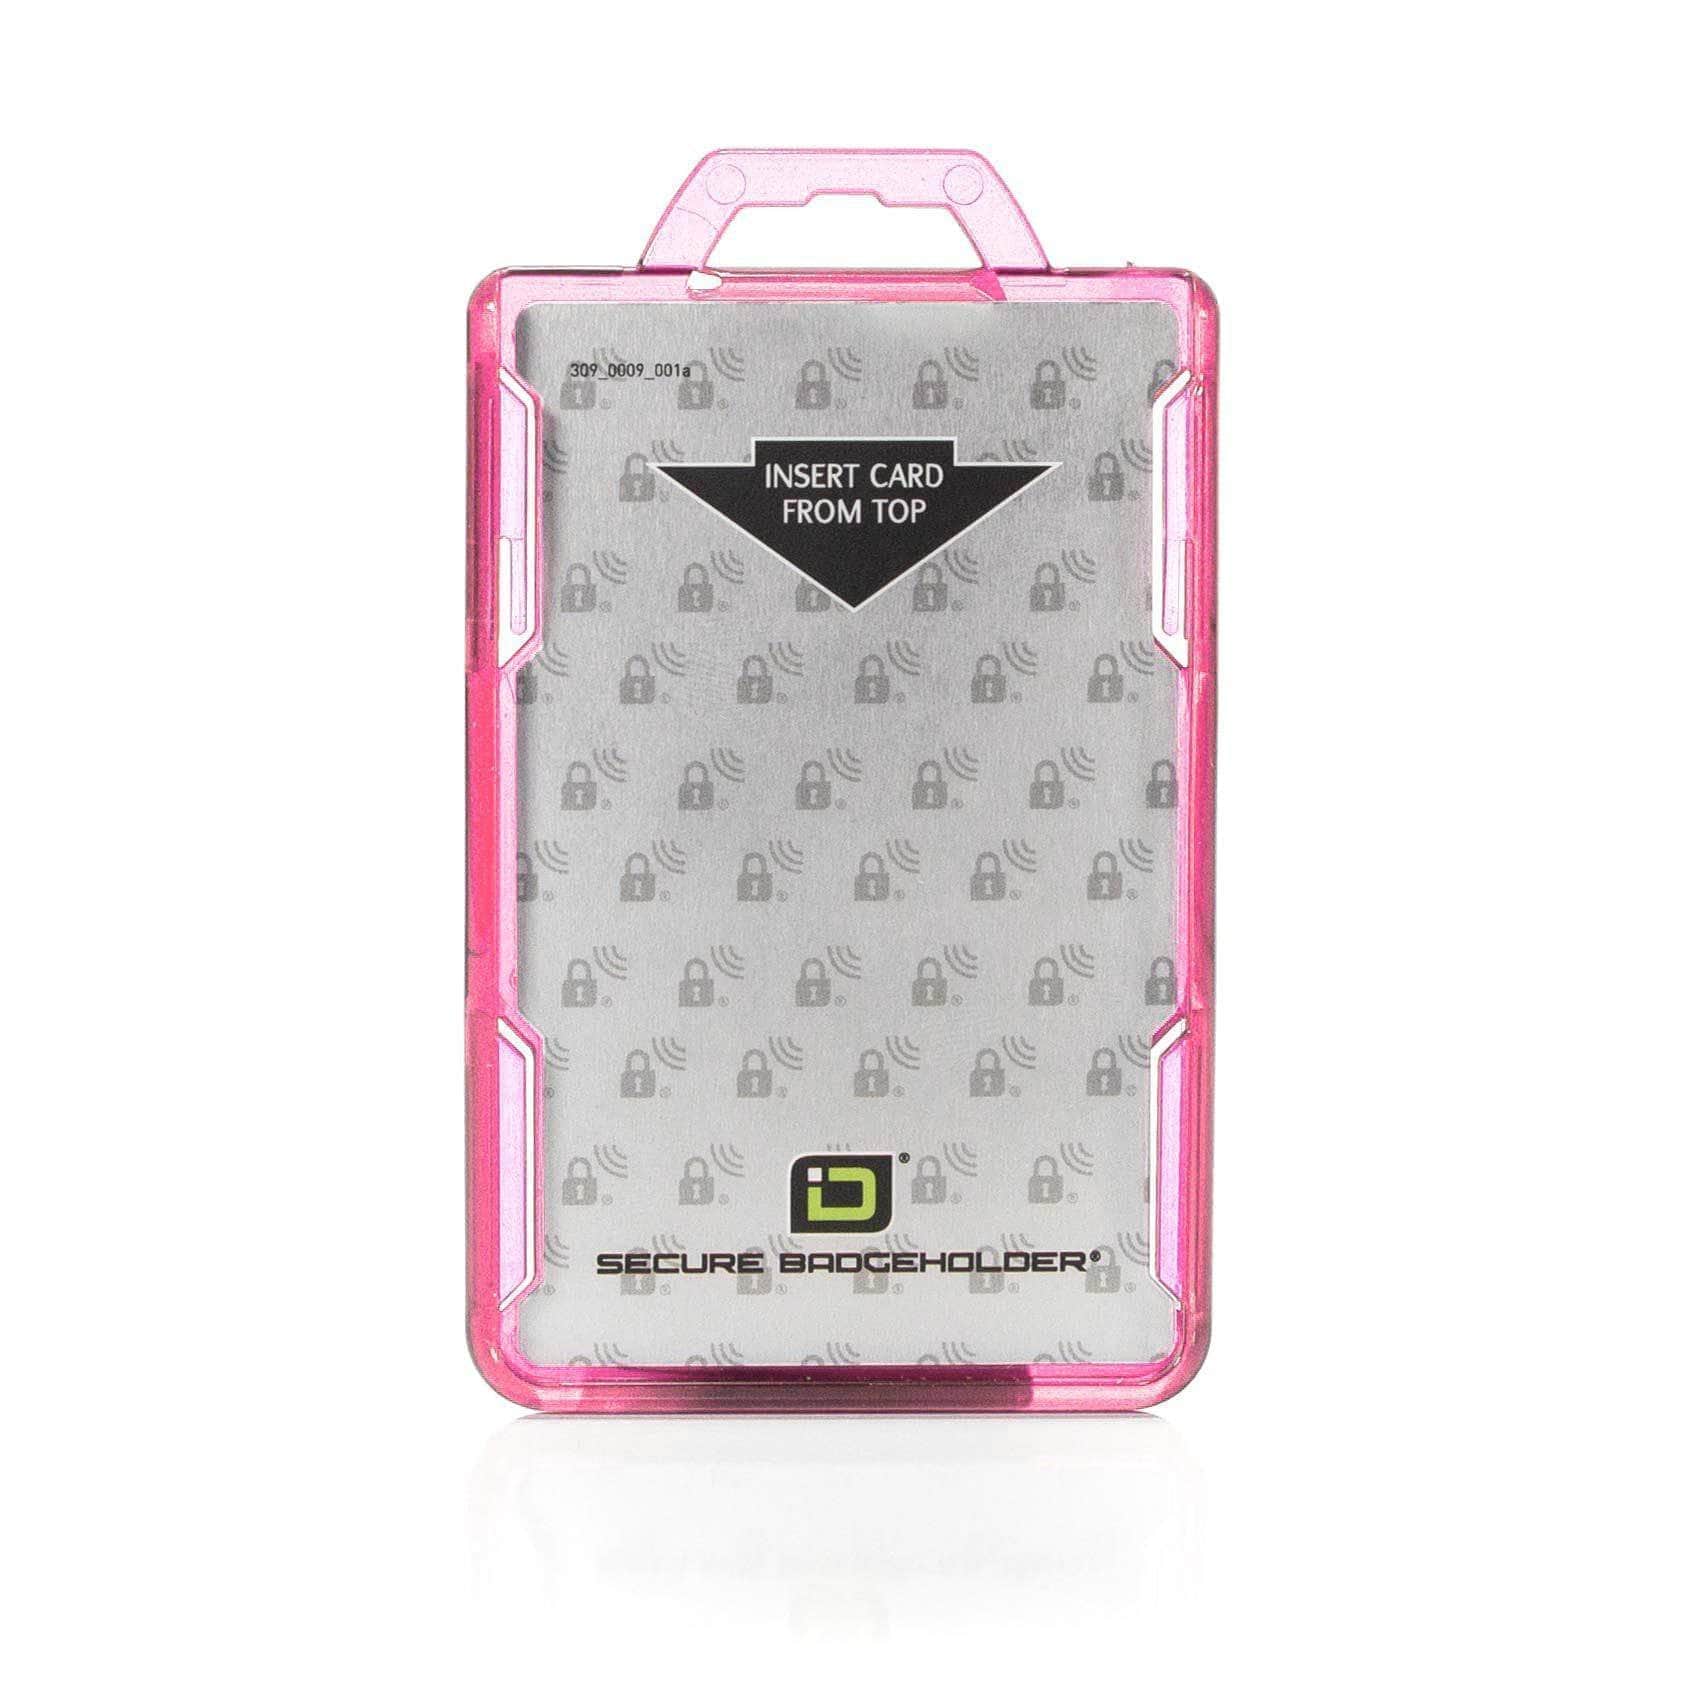 ID Stronghold Badgeholder BloxProx Pink Secure Badge Holder BloxProx™ Lite PORTRAIT - Protects 125Khz HID Prox 1 Card Holder